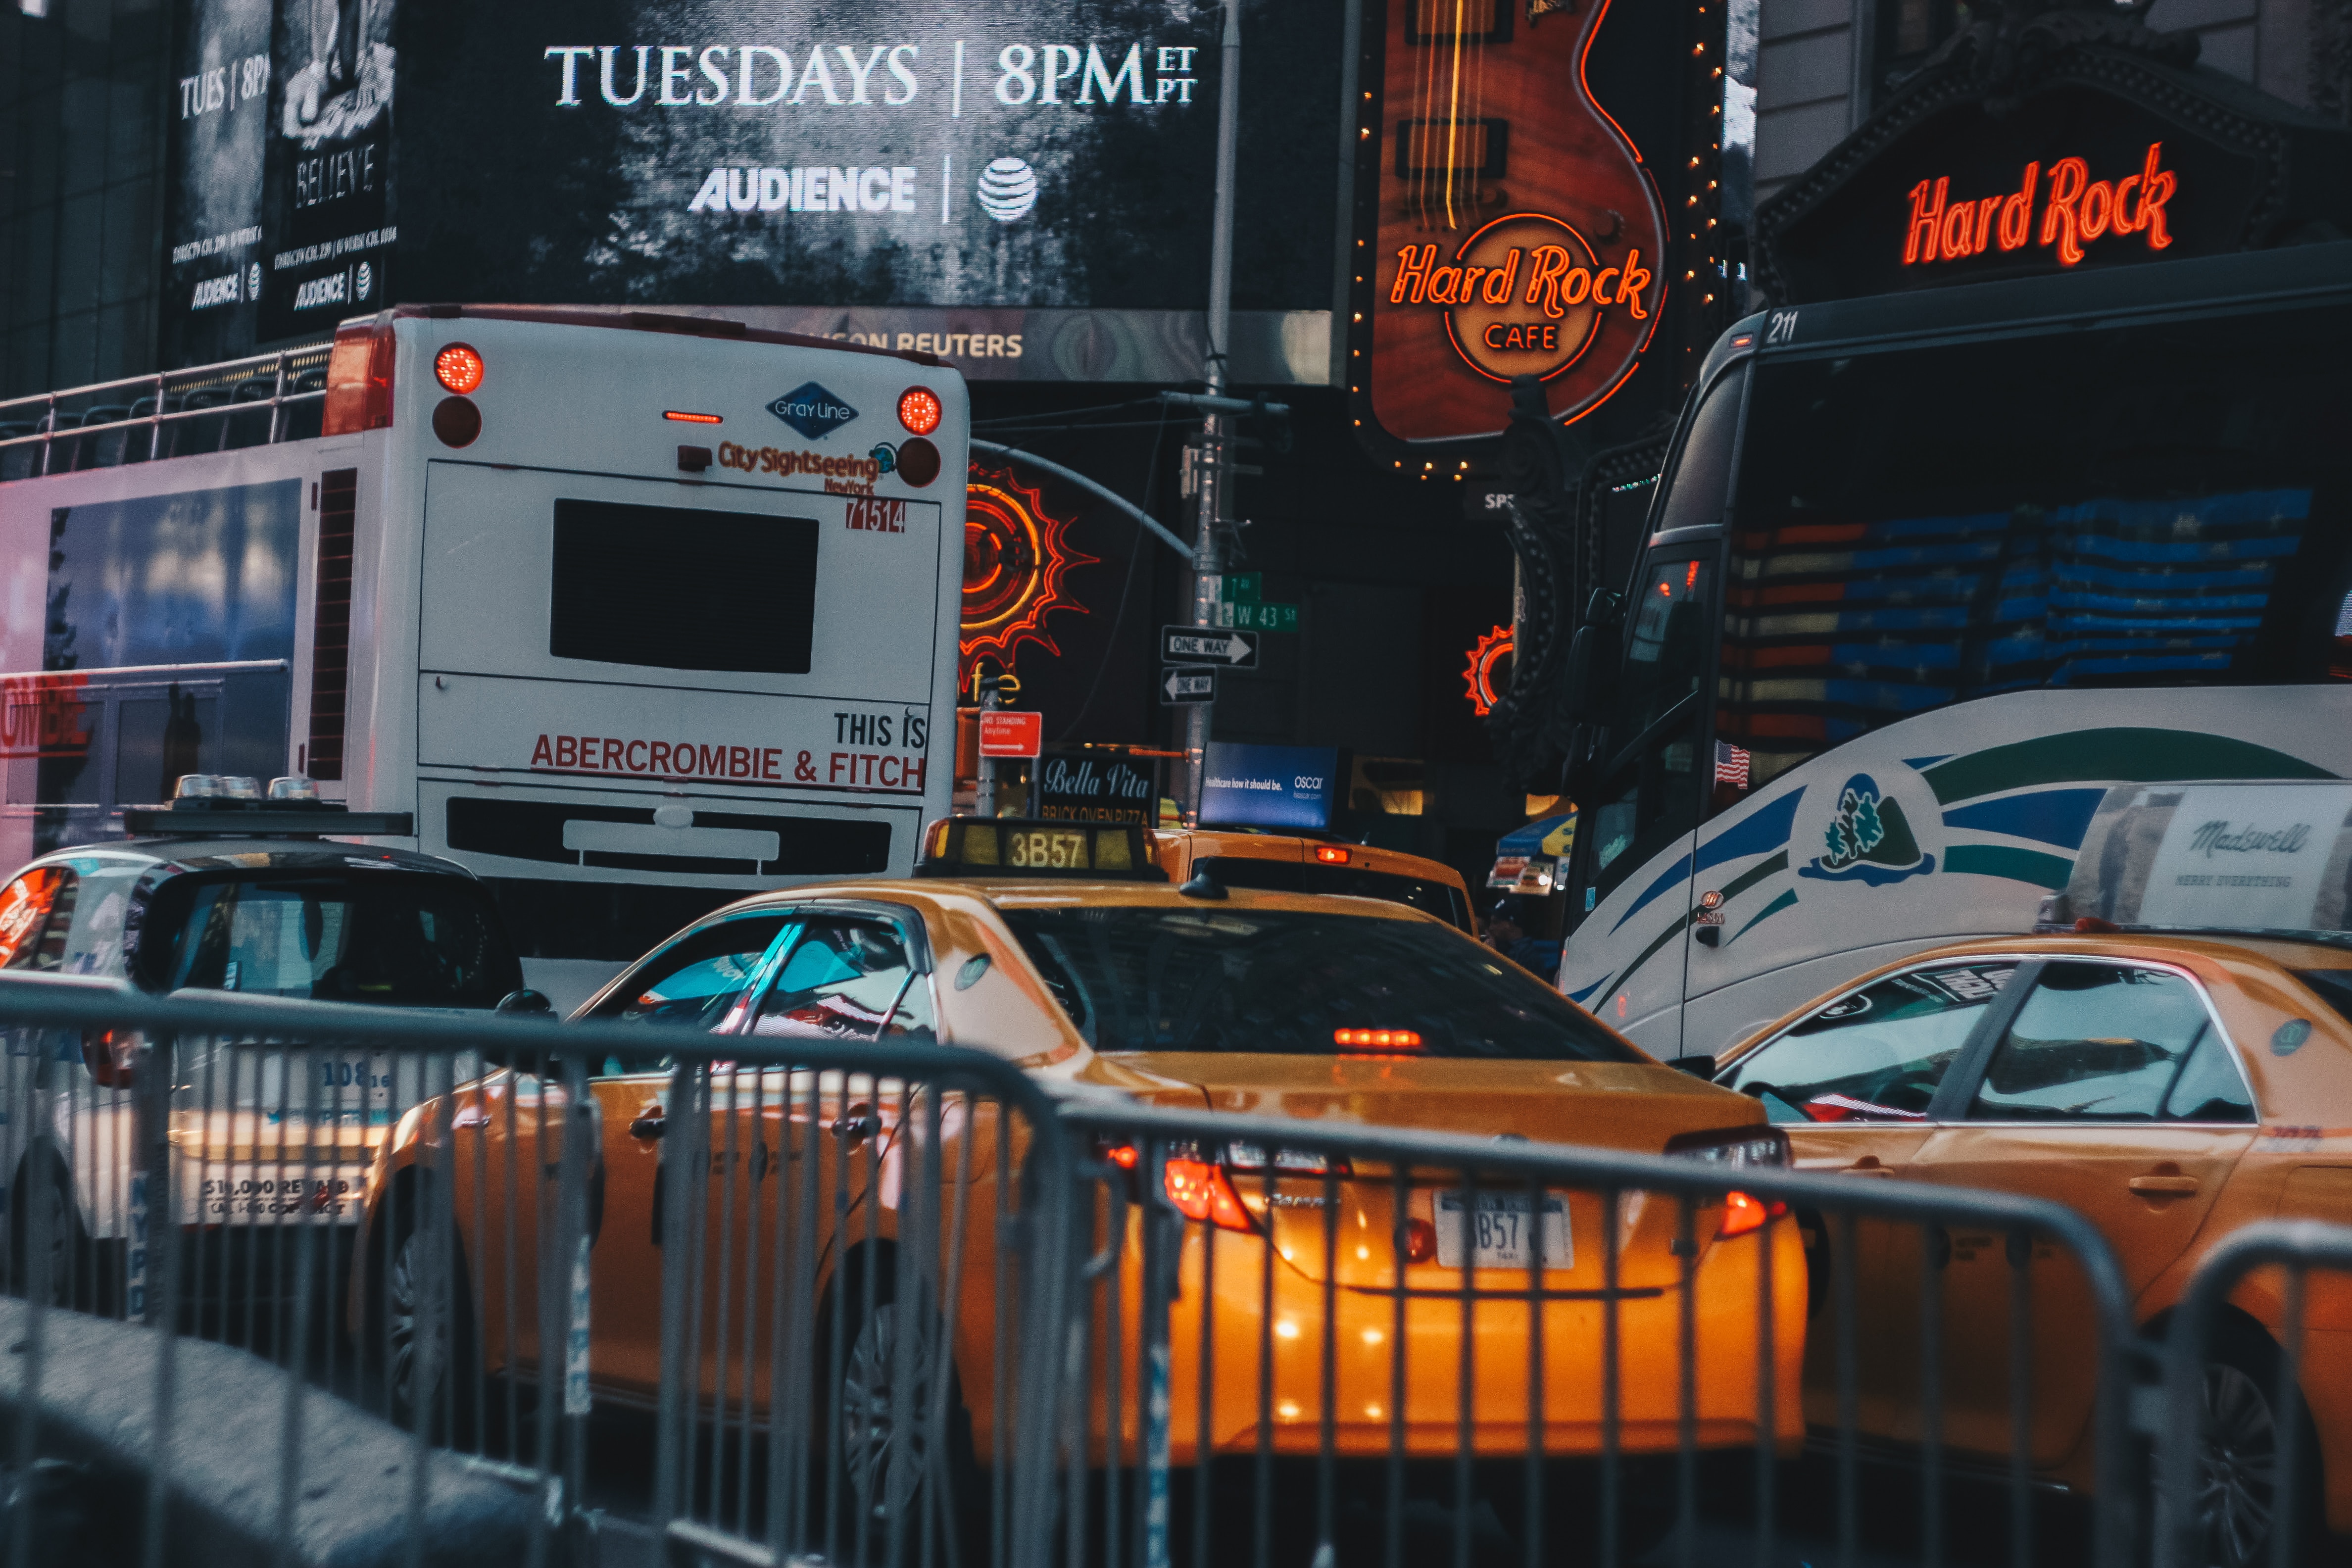 Vehicles in traffic at Times Square.